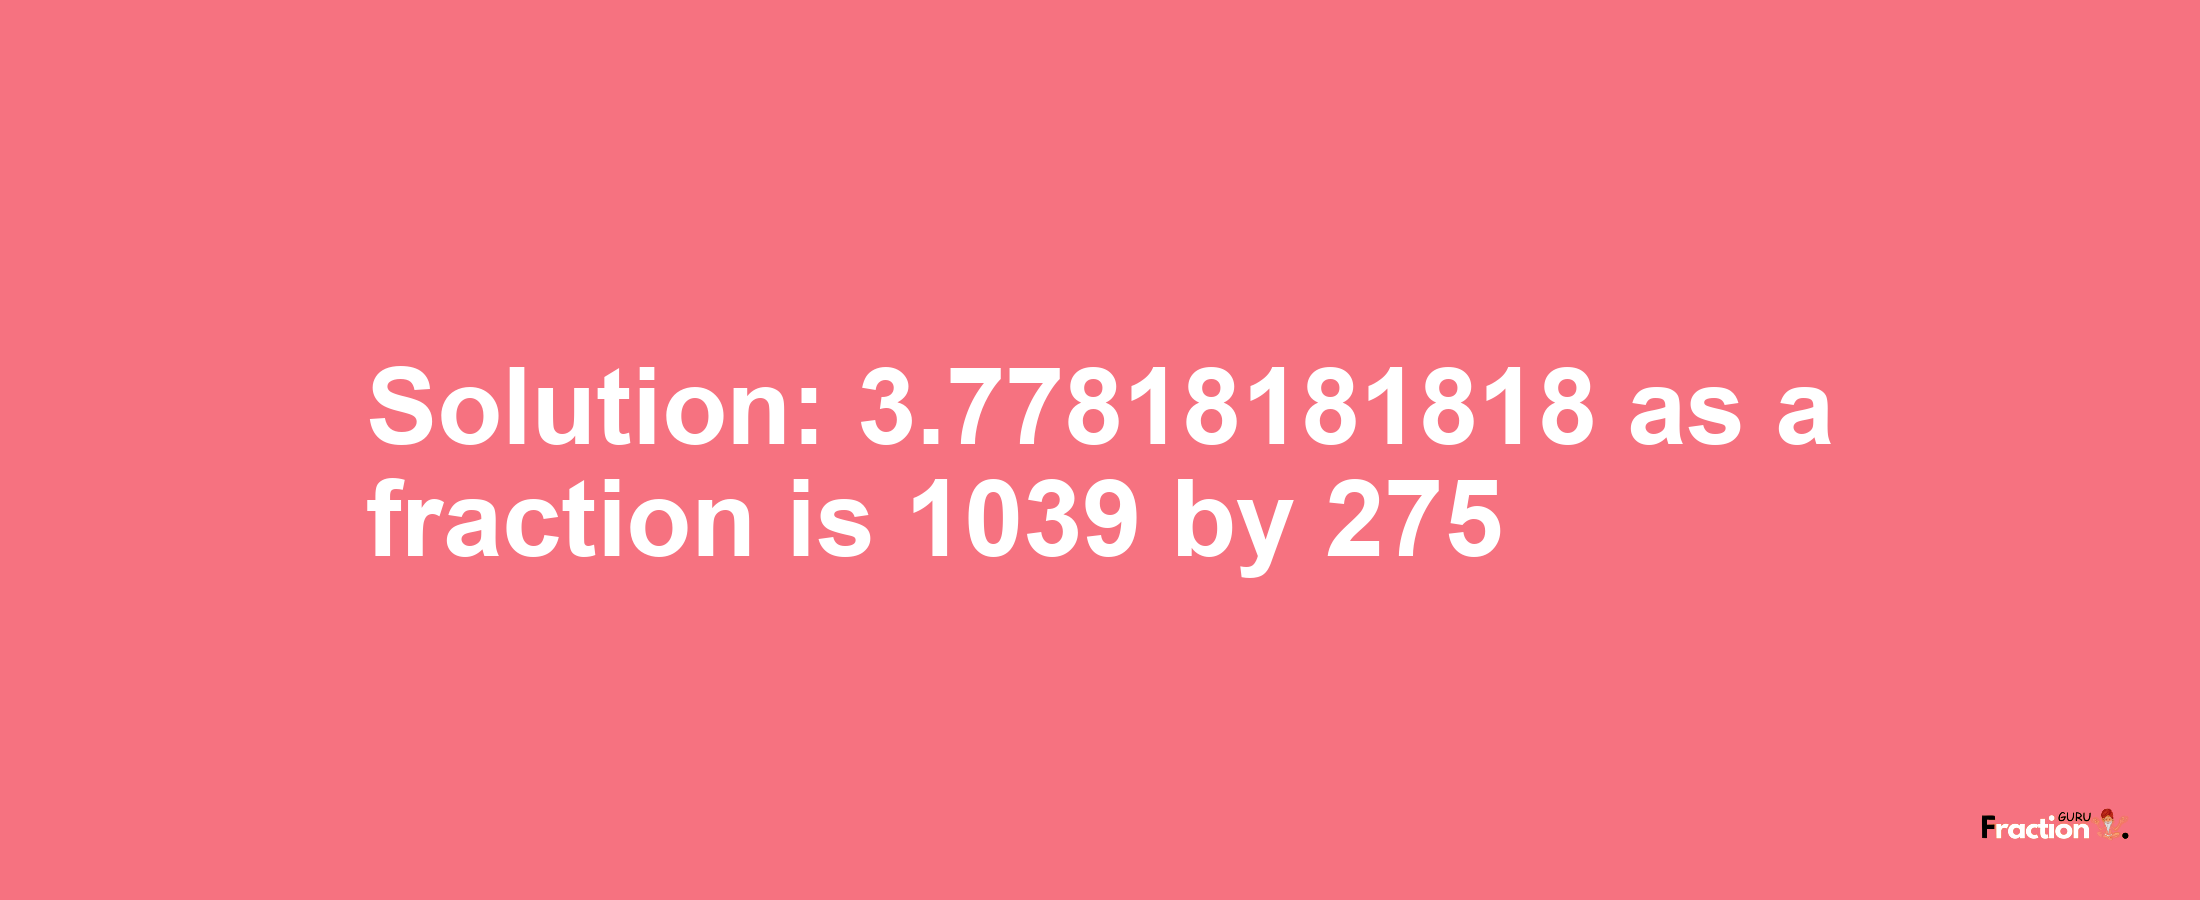 Solution:3.77818181818 as a fraction is 1039/275